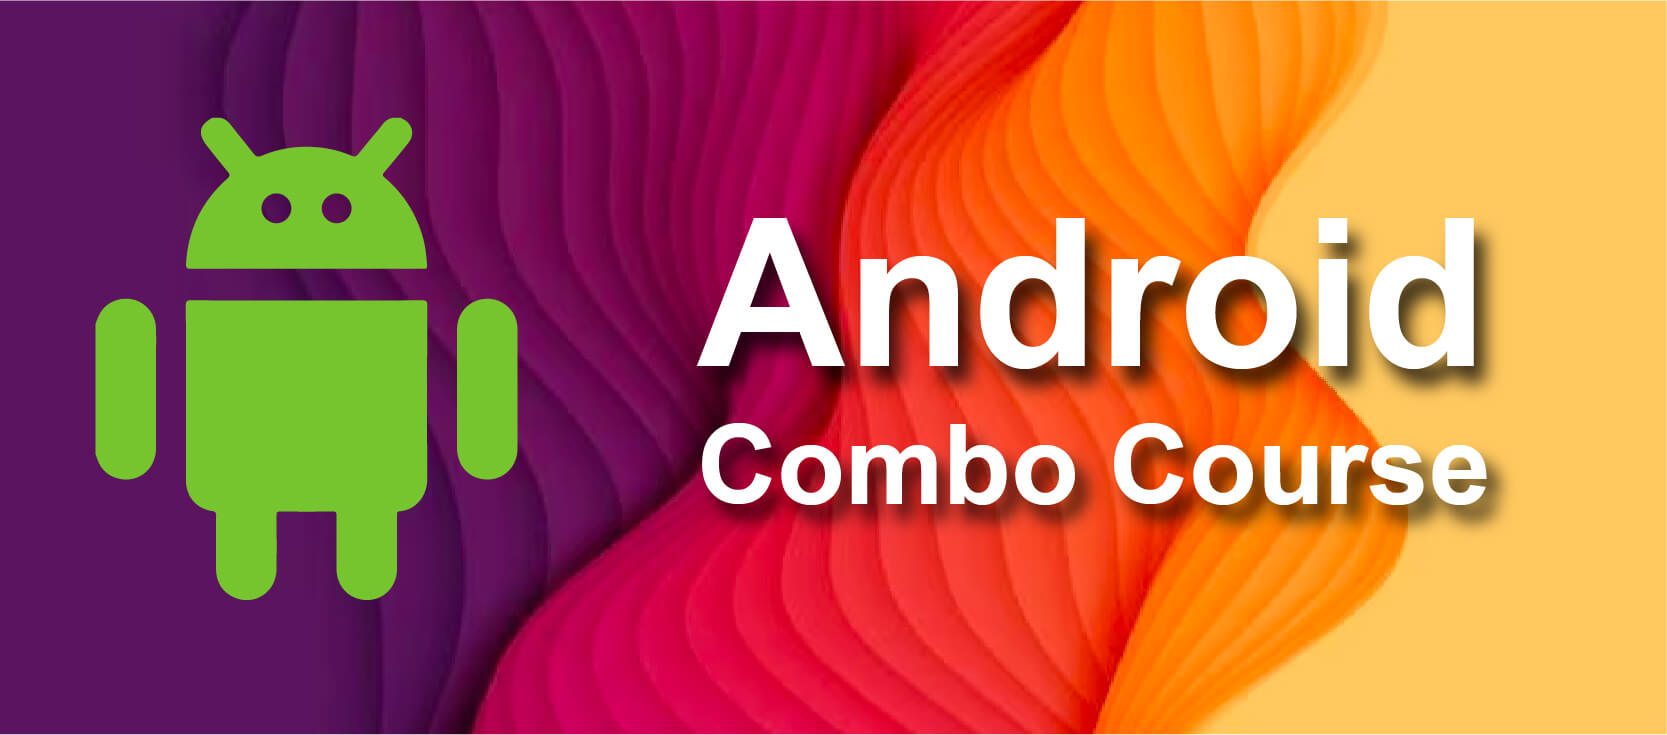 Combo Course in Android